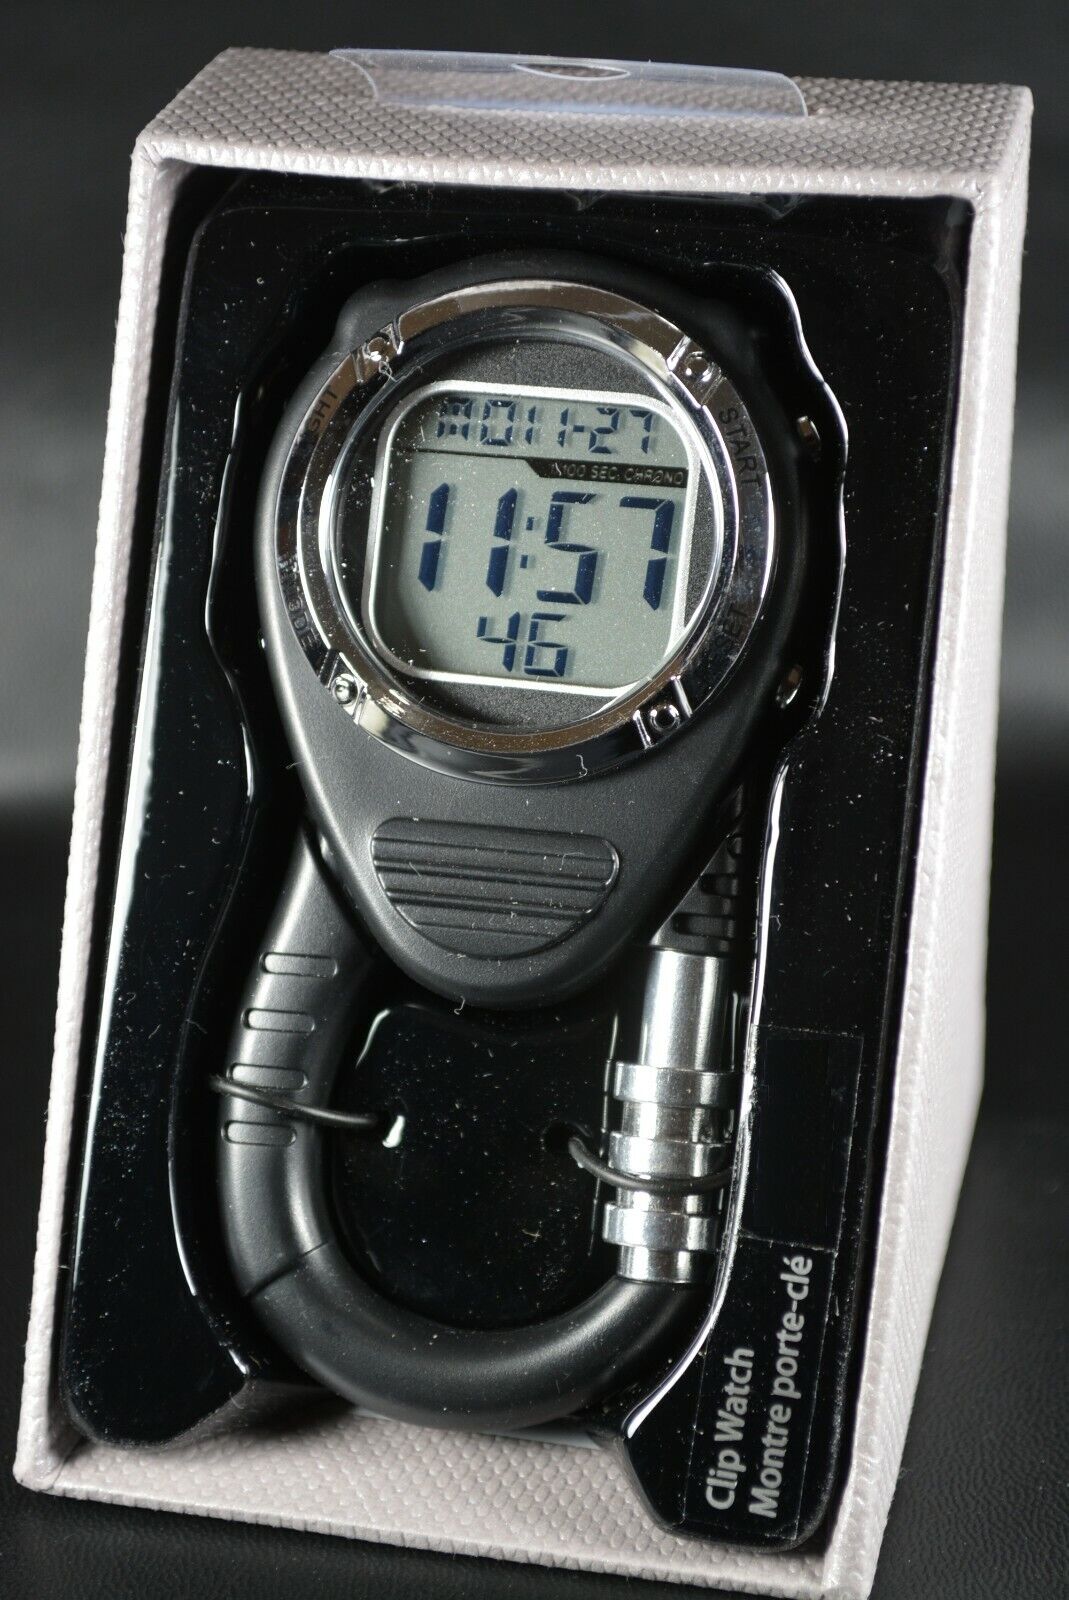 New clip-on multifunction digital sports watch - FREE SHIPPING in North America!